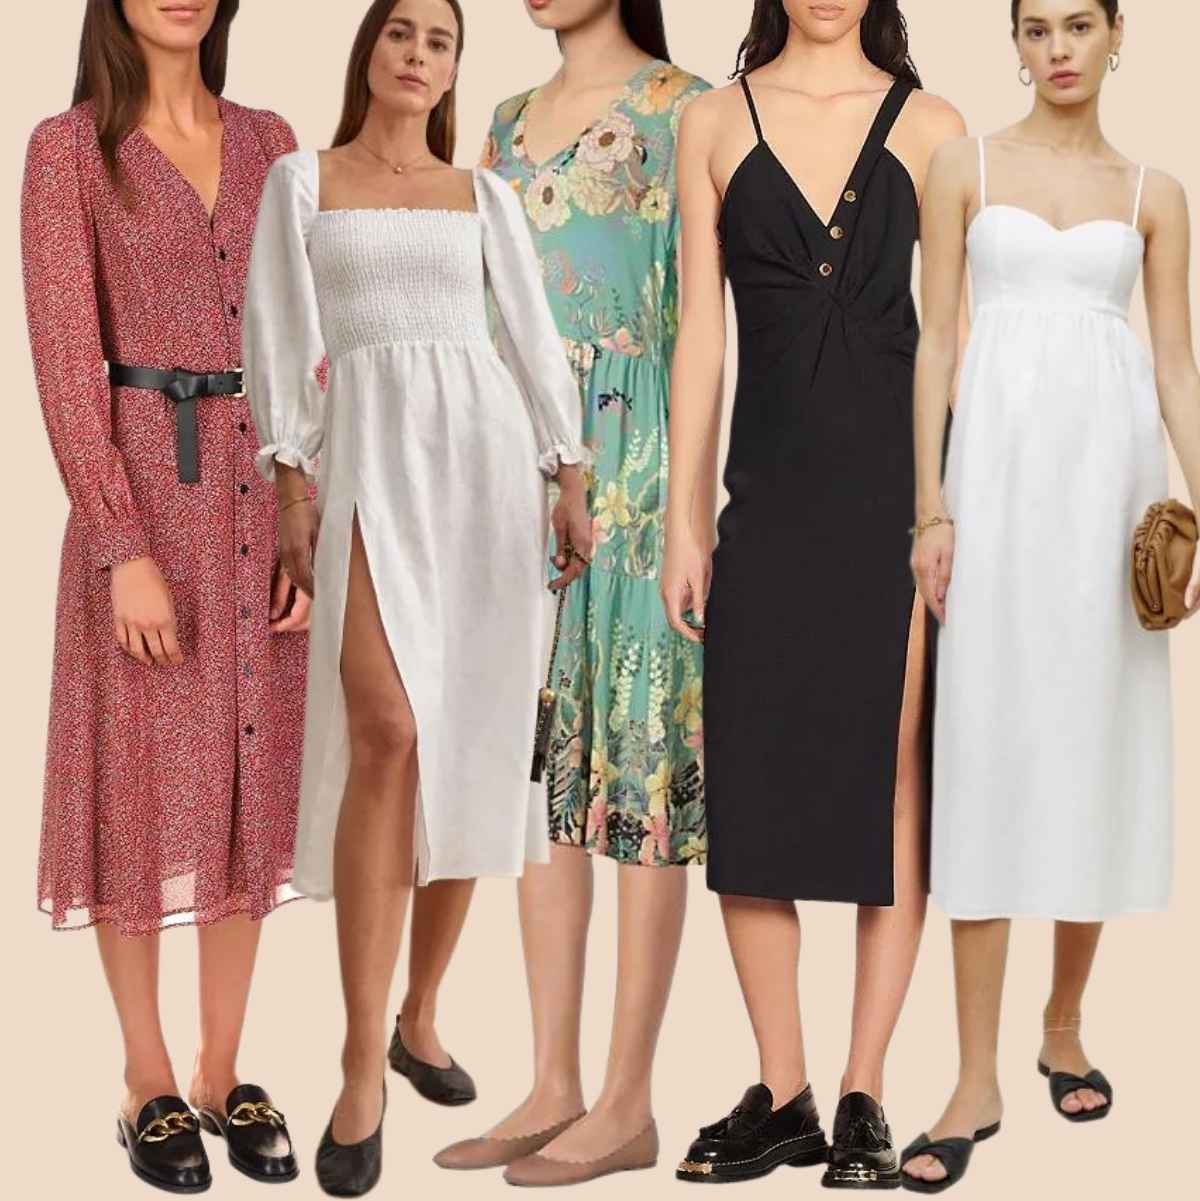 What Shoes To Wear With A Floral Midi Dress?